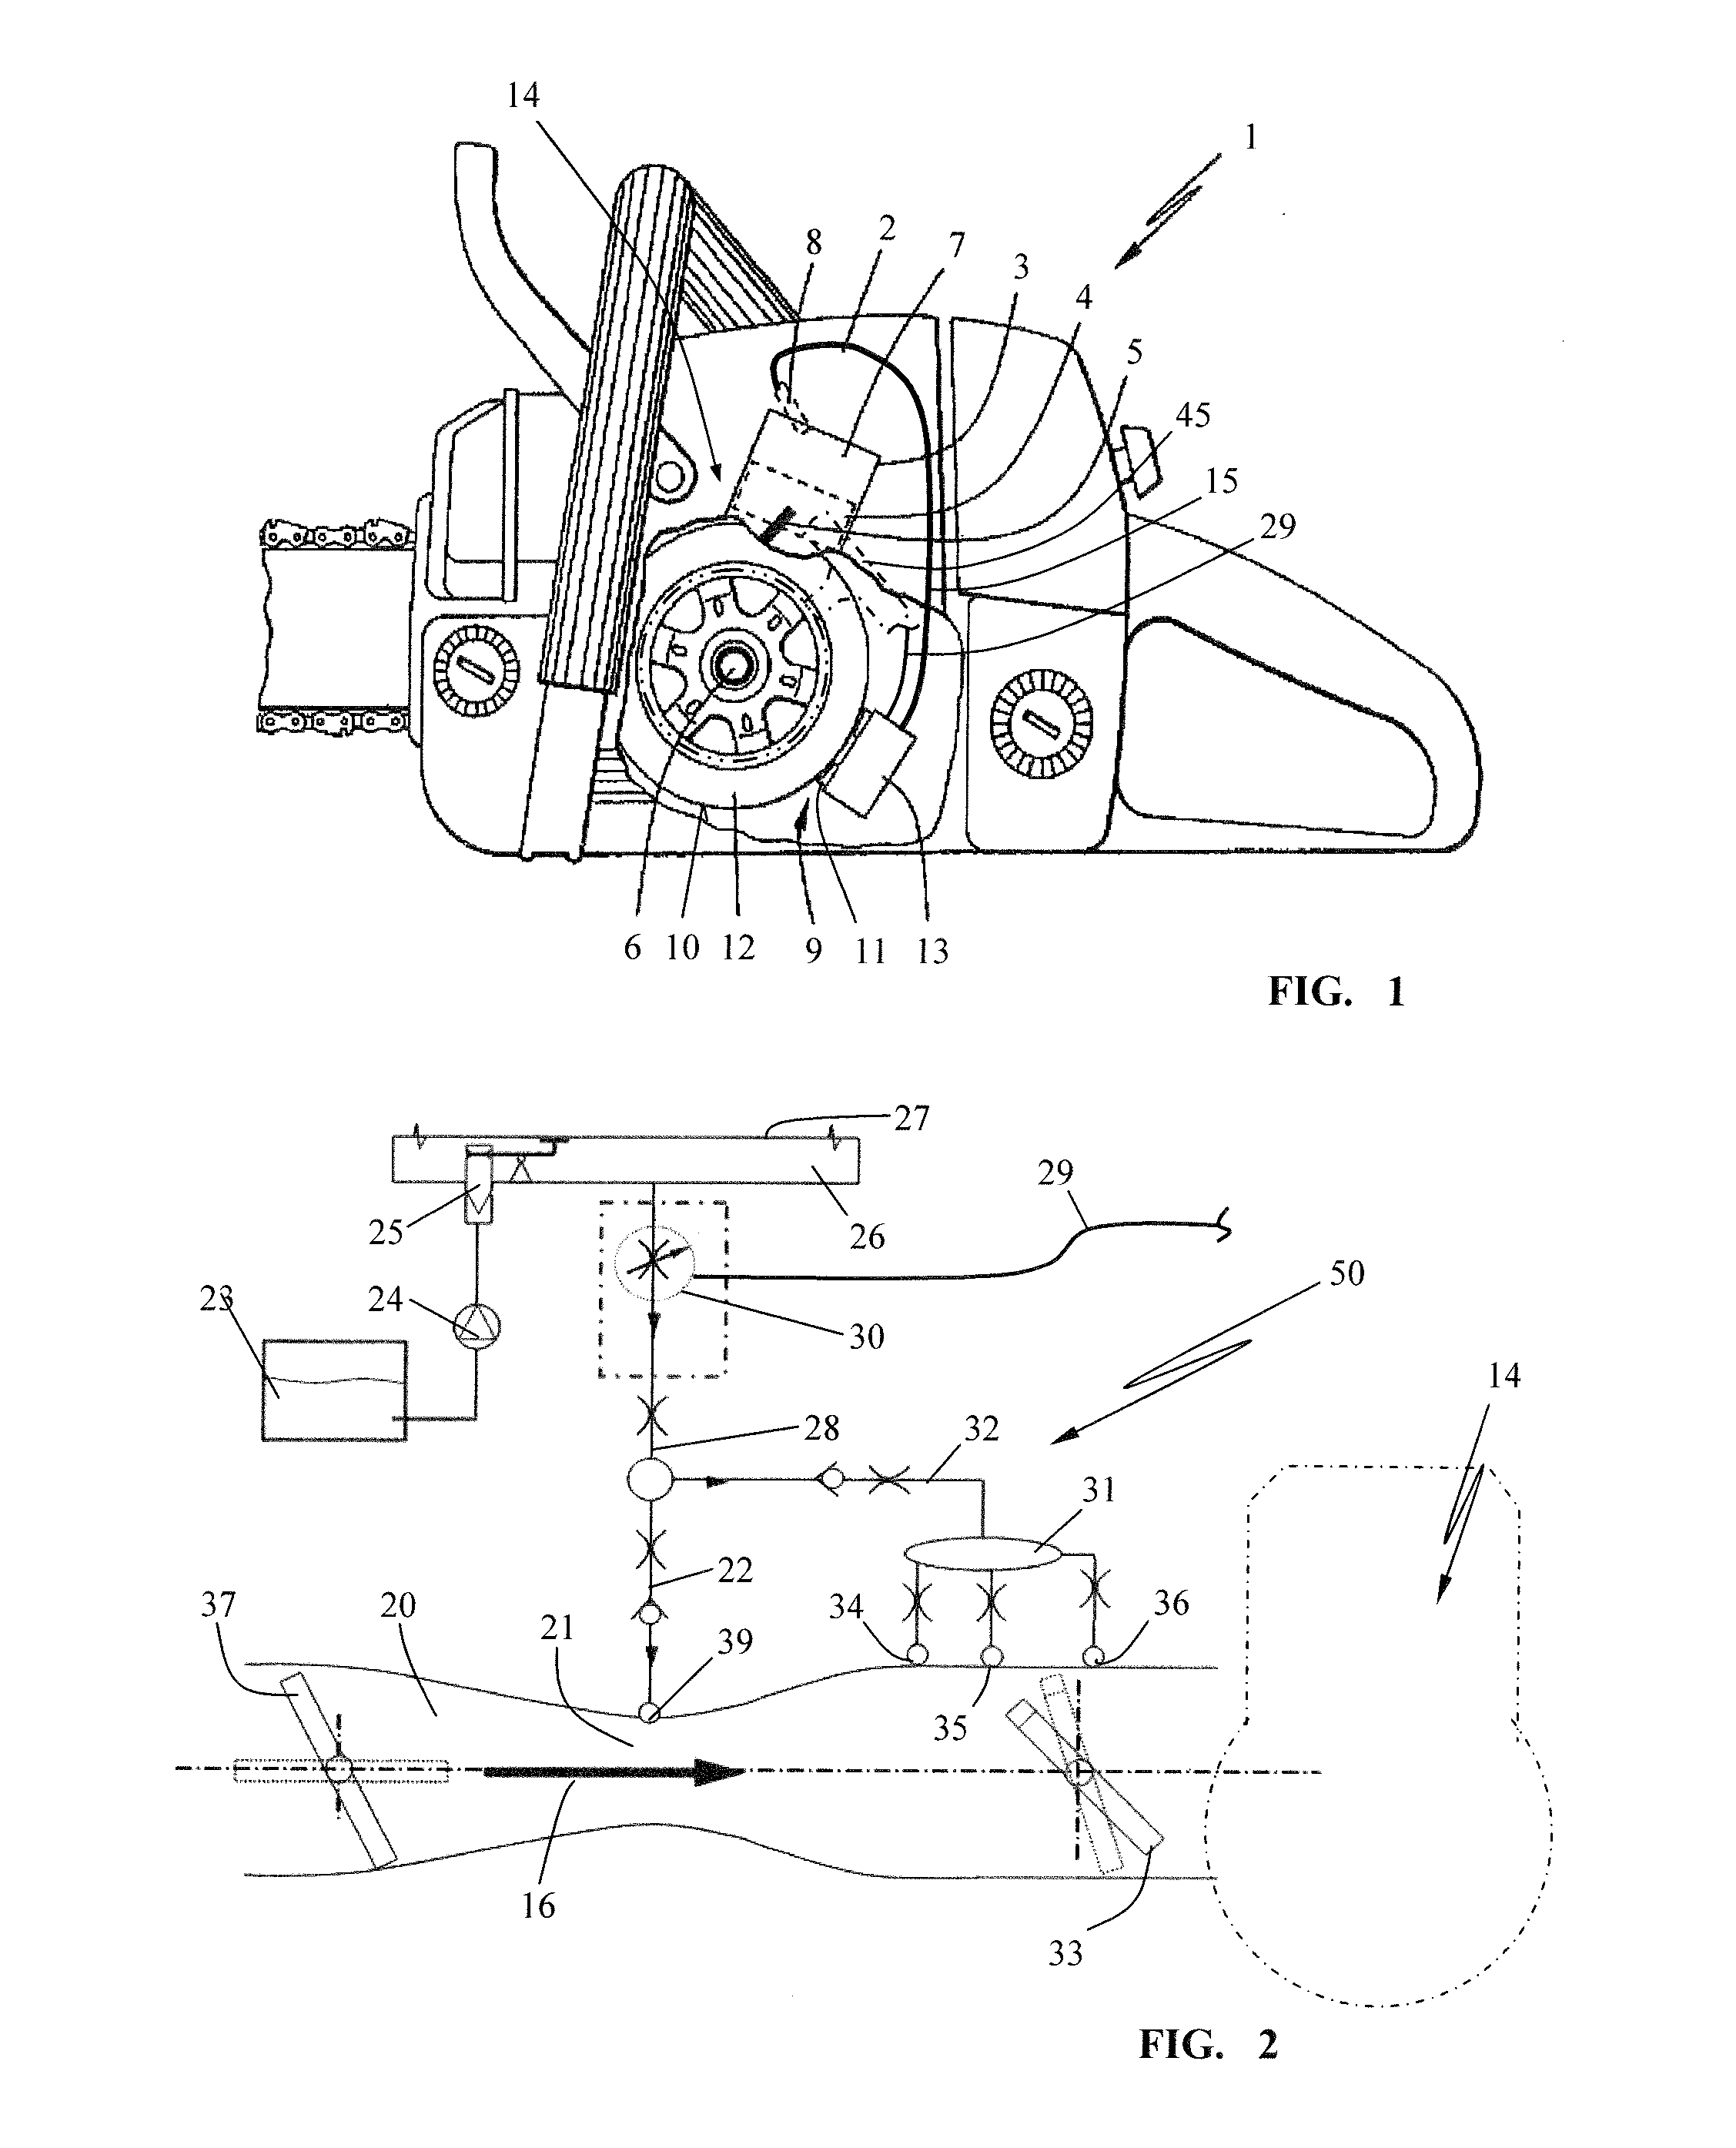 Method for starting a combustion engine having a starter apparatus